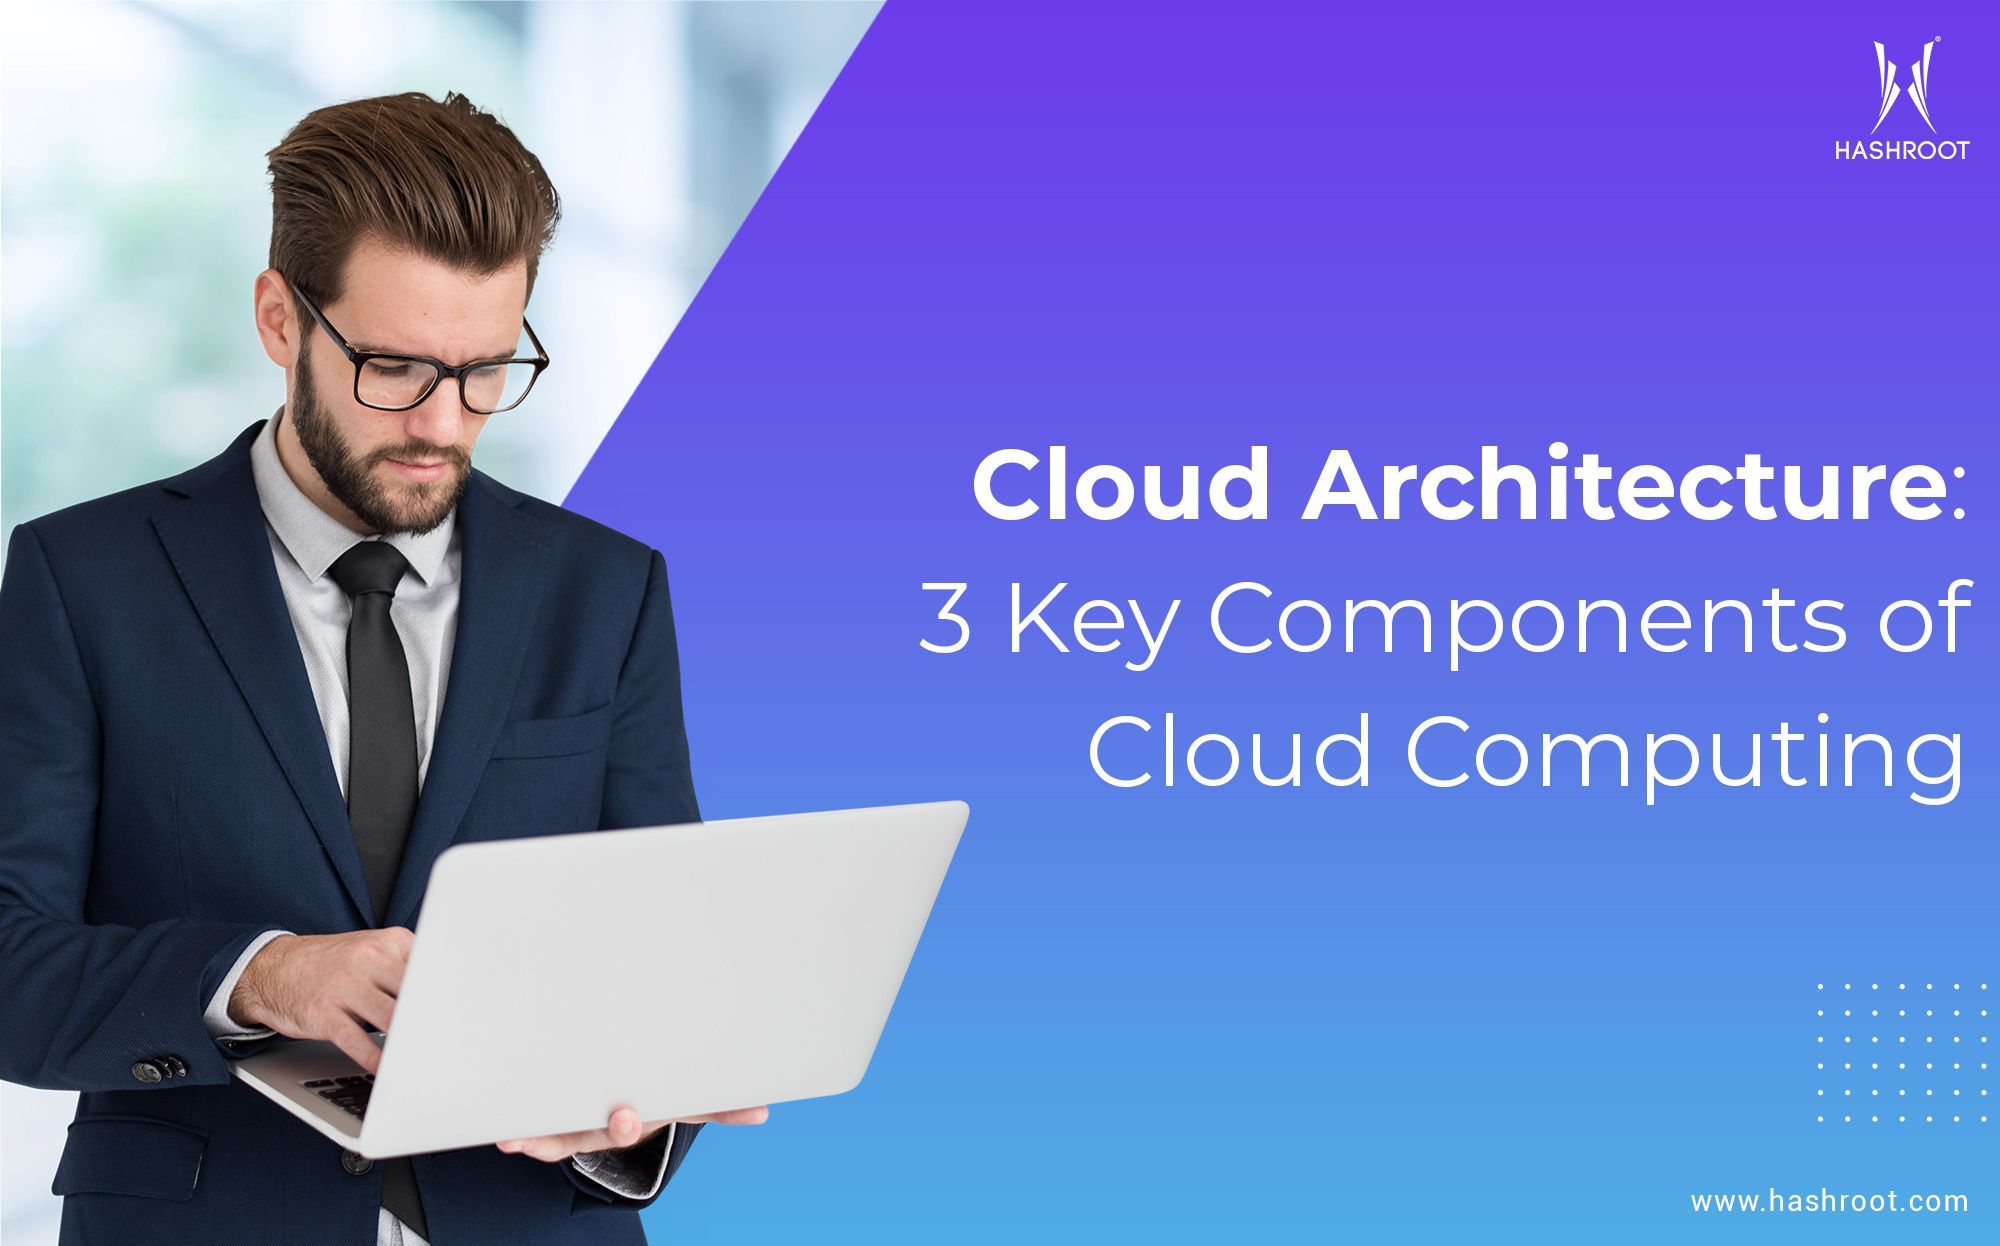 Cloud Architecture: 3 Key Components of Cloud Computing